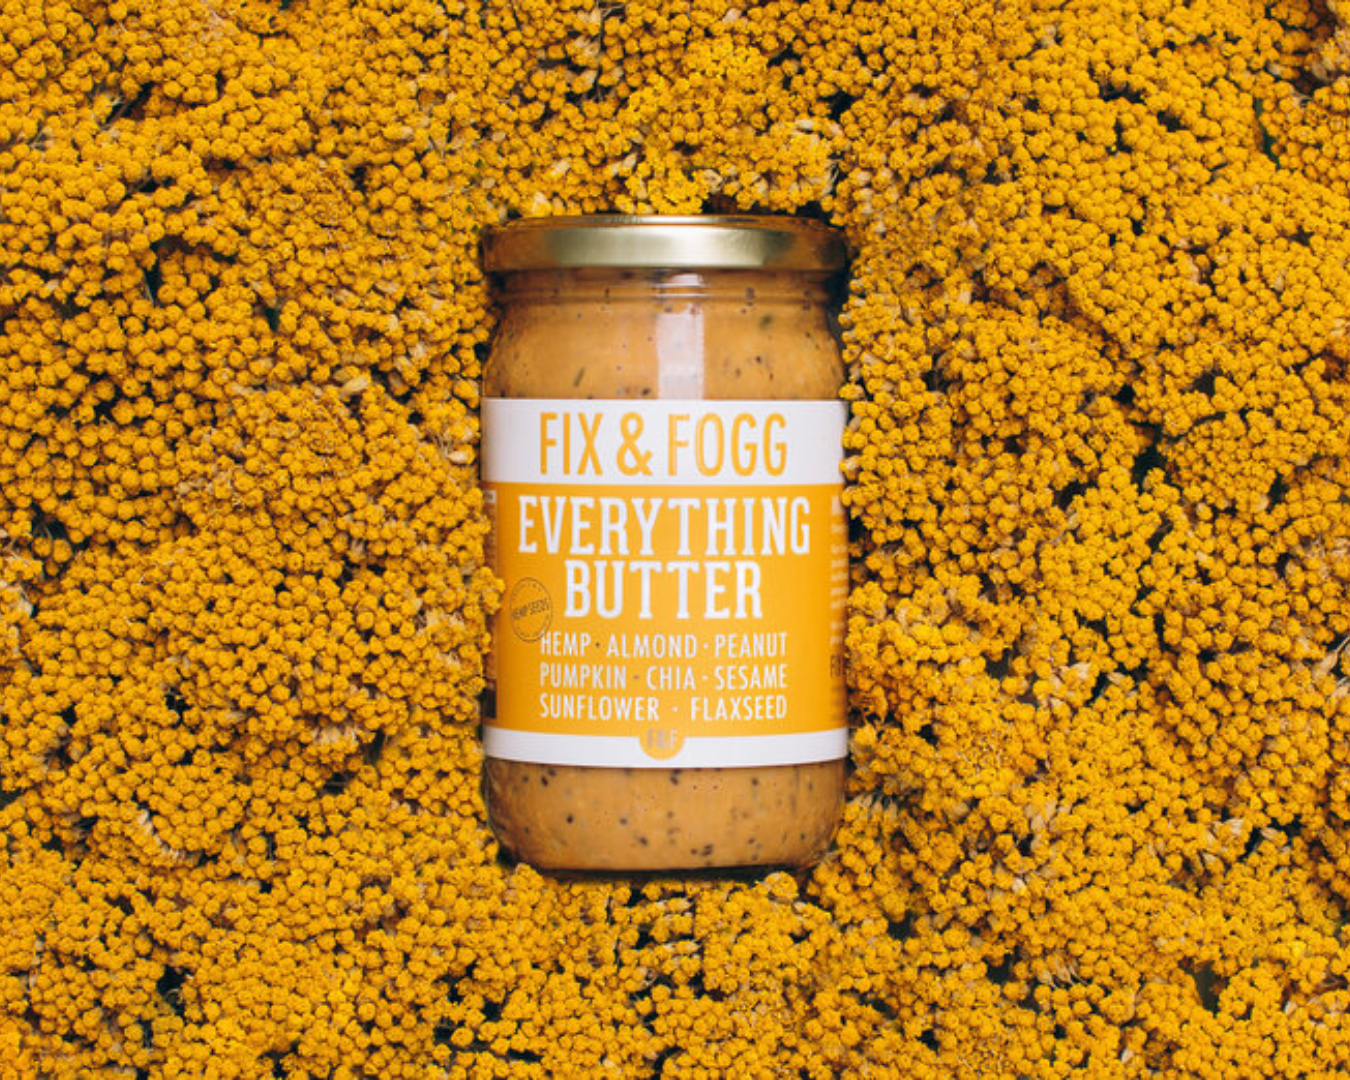 A jar of Fix & Fogg's Everything Butter stands out against a background of yellow flowers